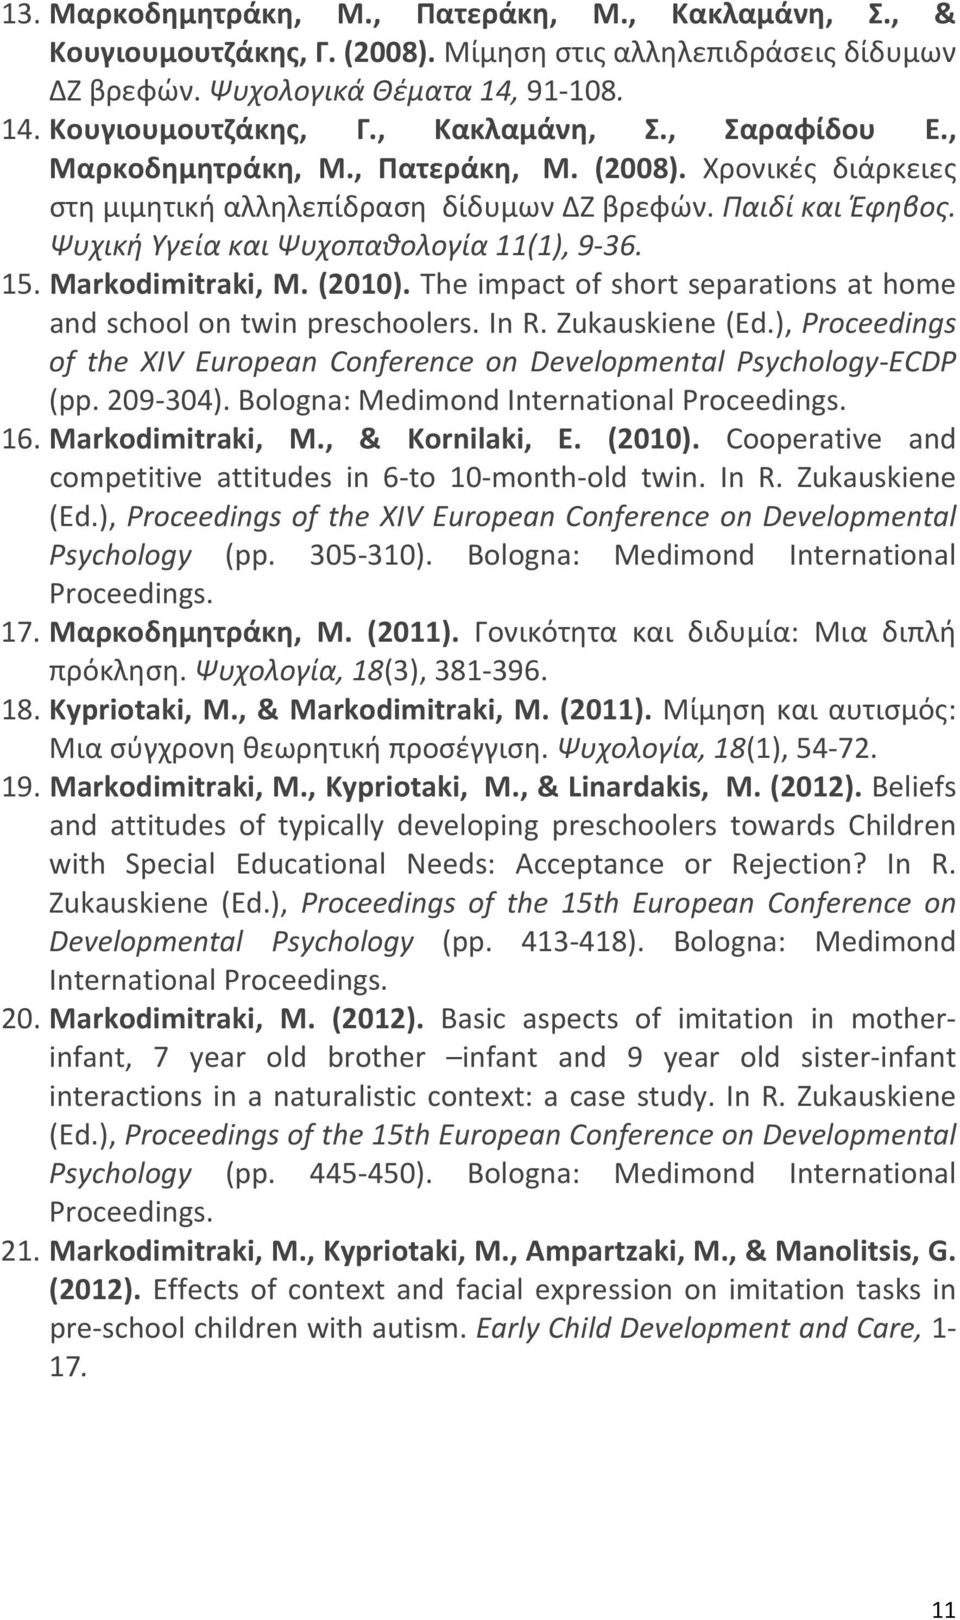 The impact of short separations at home and school on twin preschoolers. In R. Zukauskiene (Ed.), Proceedings of the XIV European Conference on Developmental Psychology ECDP (pp. 209 304).